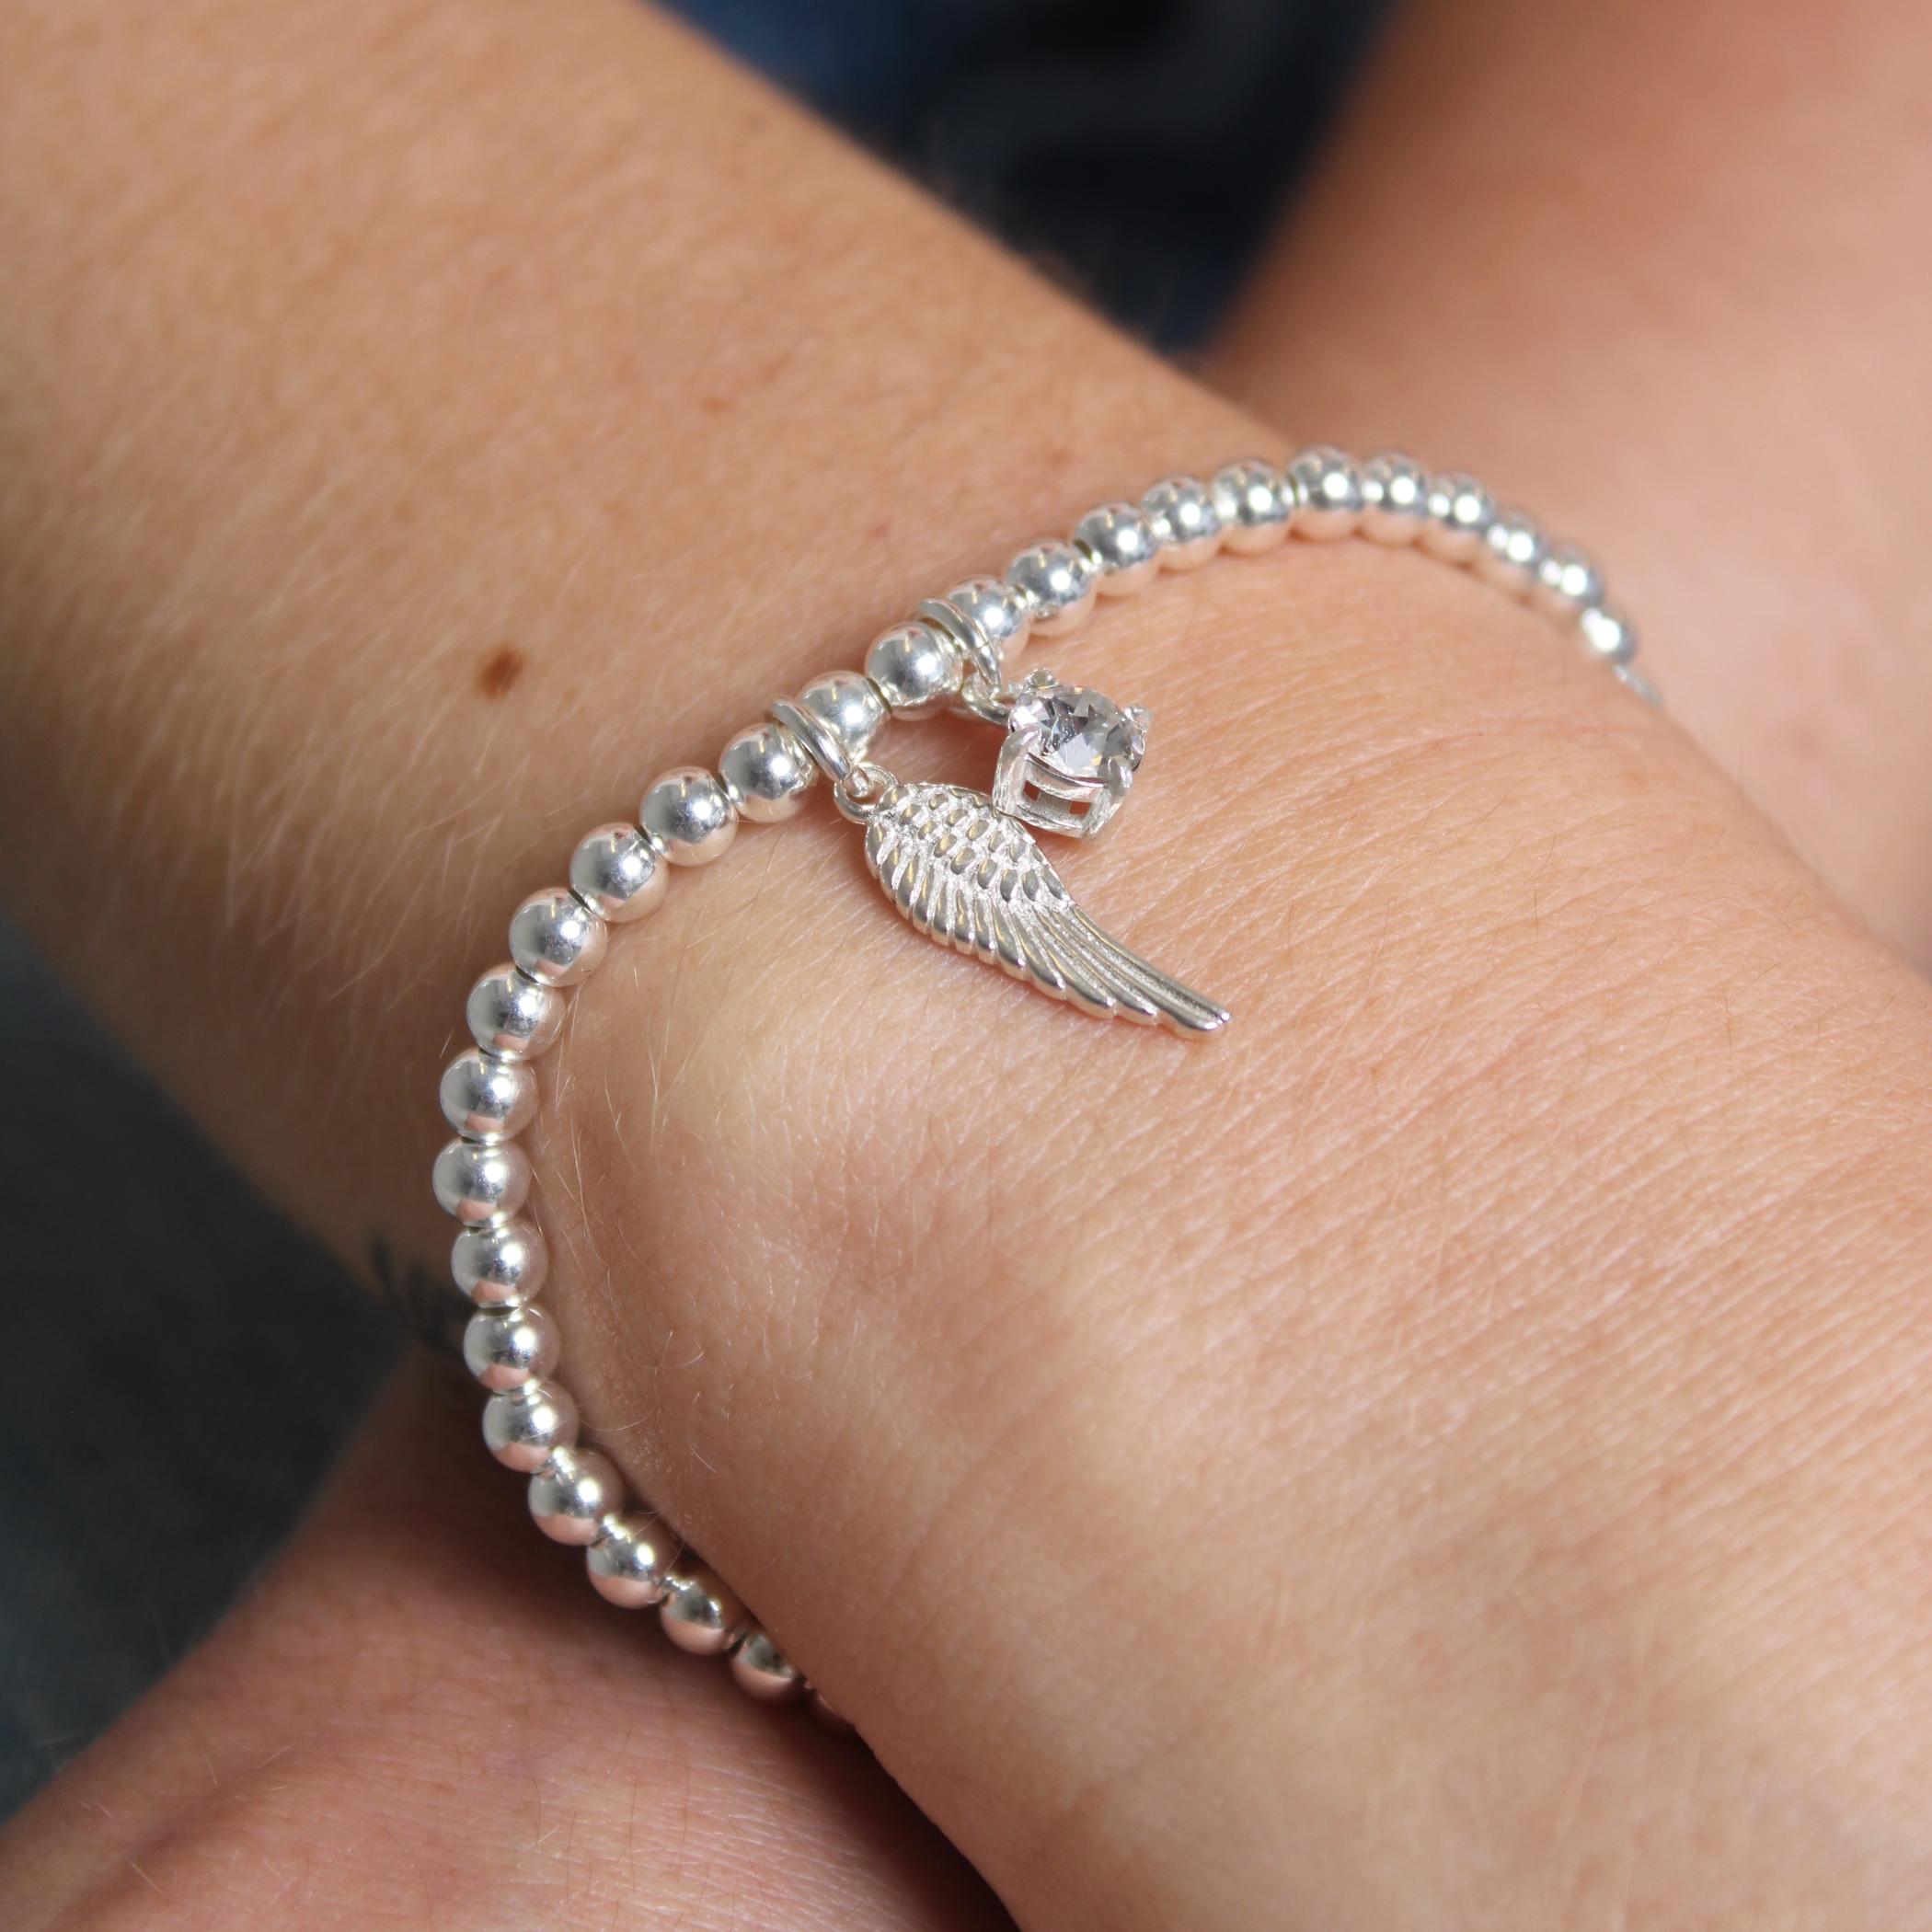 Tattoo bracelet with angel wing | Angel wing wrist tattoo, Tattoo bracelet, Charm  bracelet tattoo